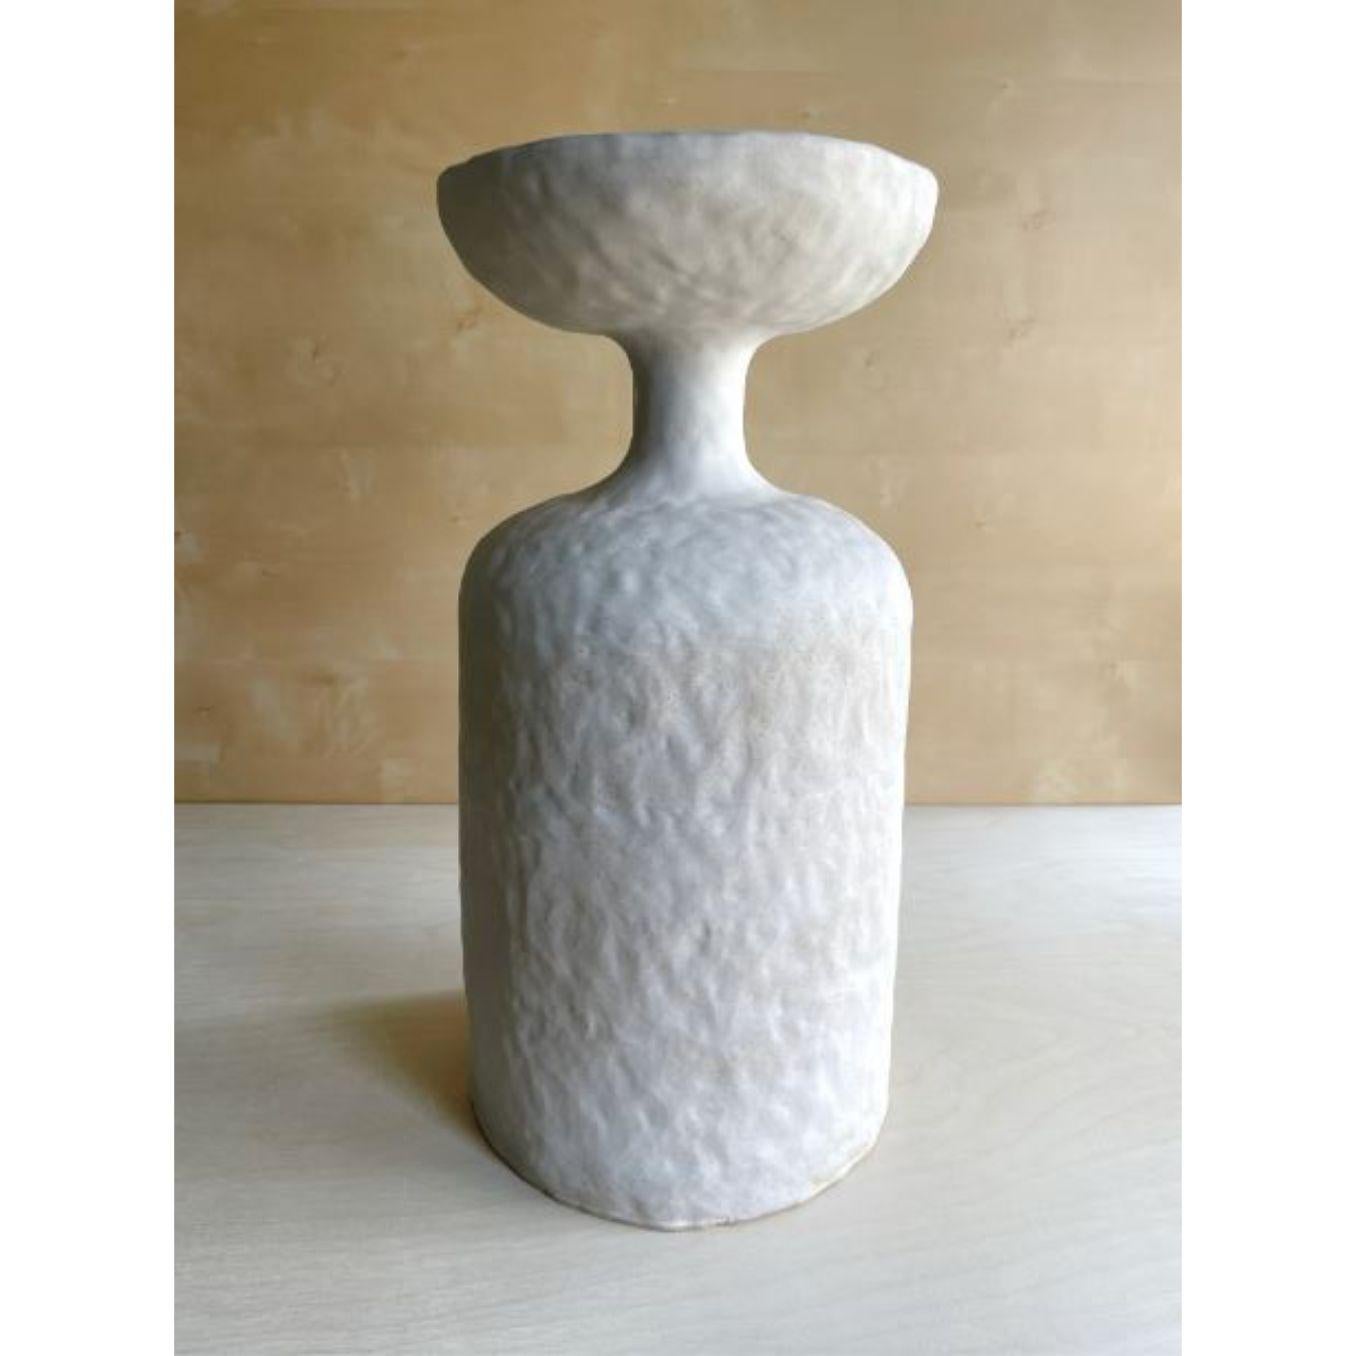 John side table by Meg Morrison
Materials: Ceramic
Dimensions: W 24.5 x D 24.5 x H 50 cm

Hand sculpted ceramic vase with a soft robin's egg blue finish. Water tight for flowers. Includes cork sheet to protect surface from condensation.

Meg